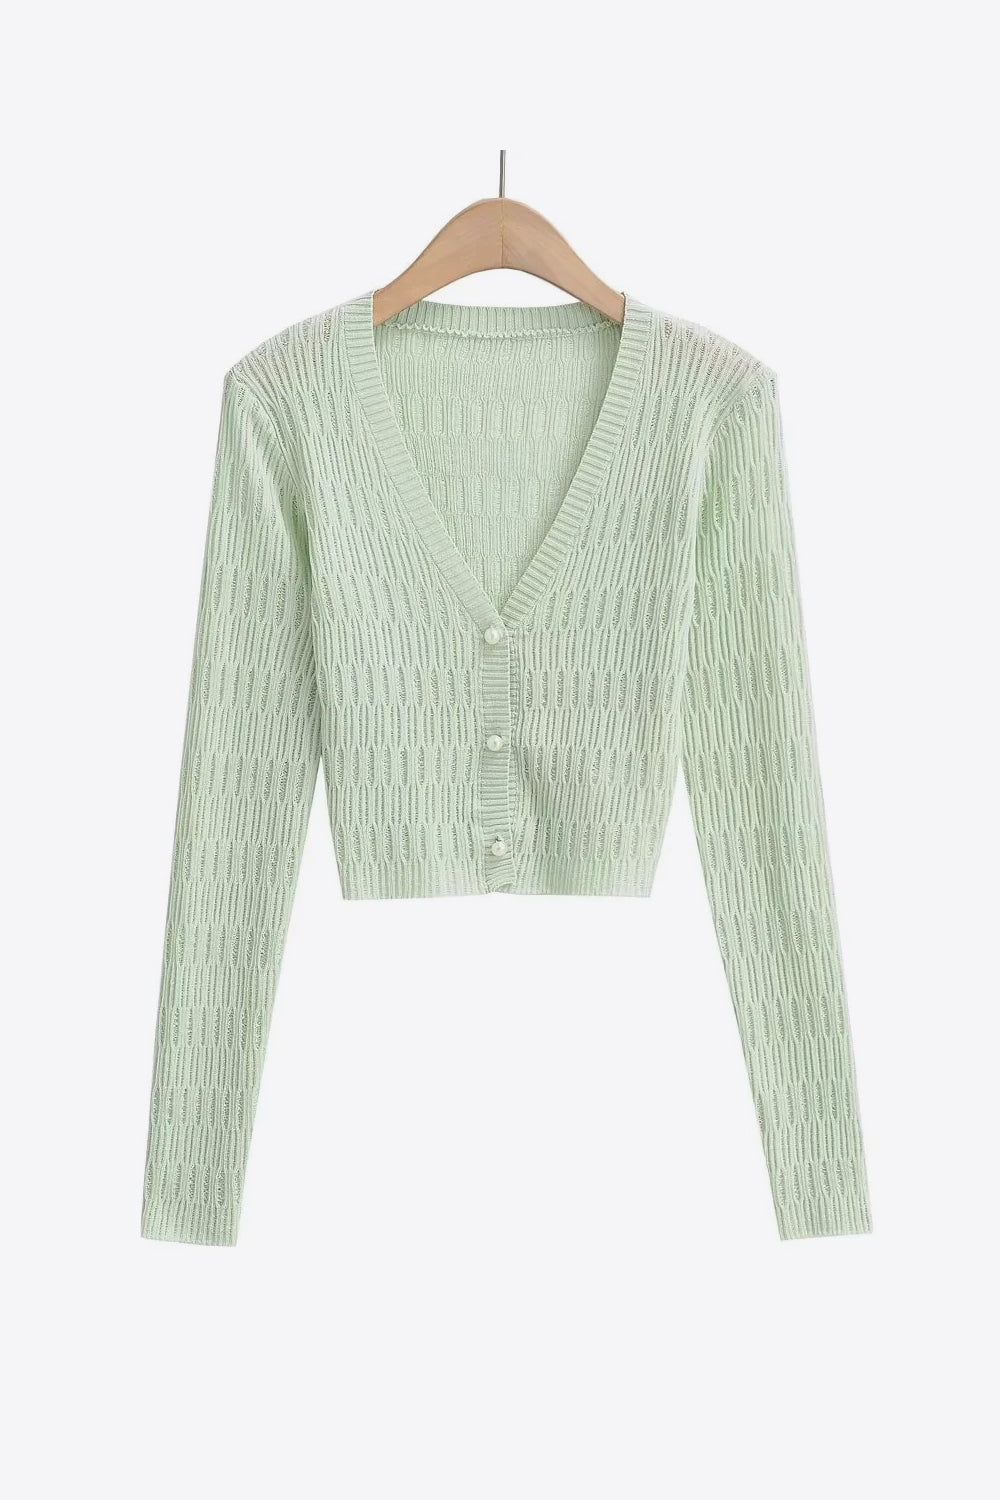 Lavender Fields Cropped Cardigan